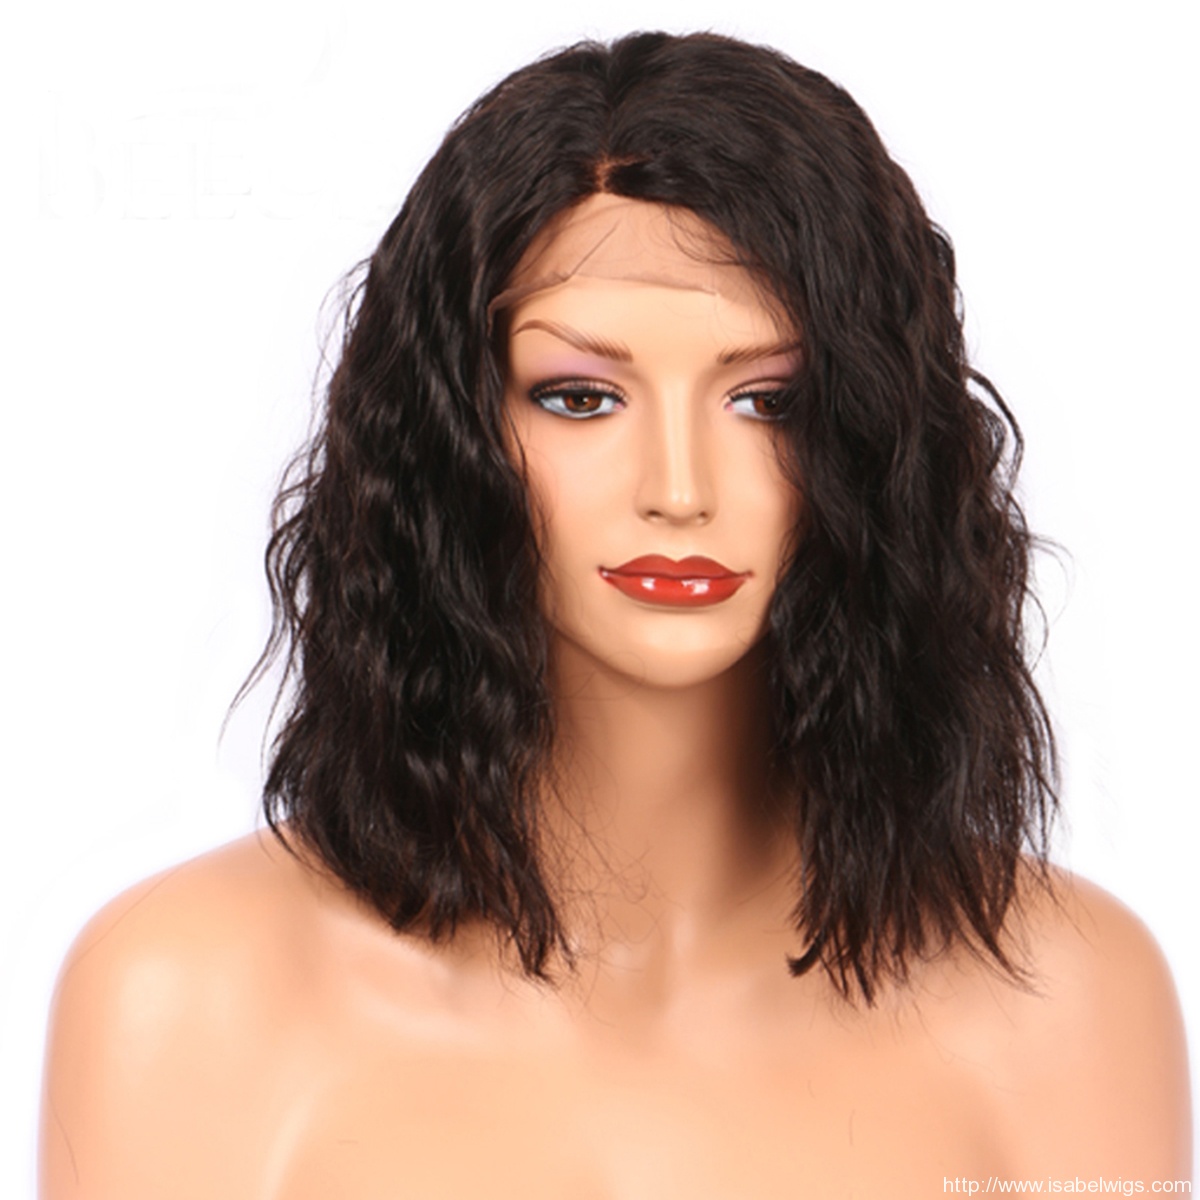 Short Bob Lace Front Human Hair Wigs For Black Women Wavy Short Human Hair Wigs With Baby Hair